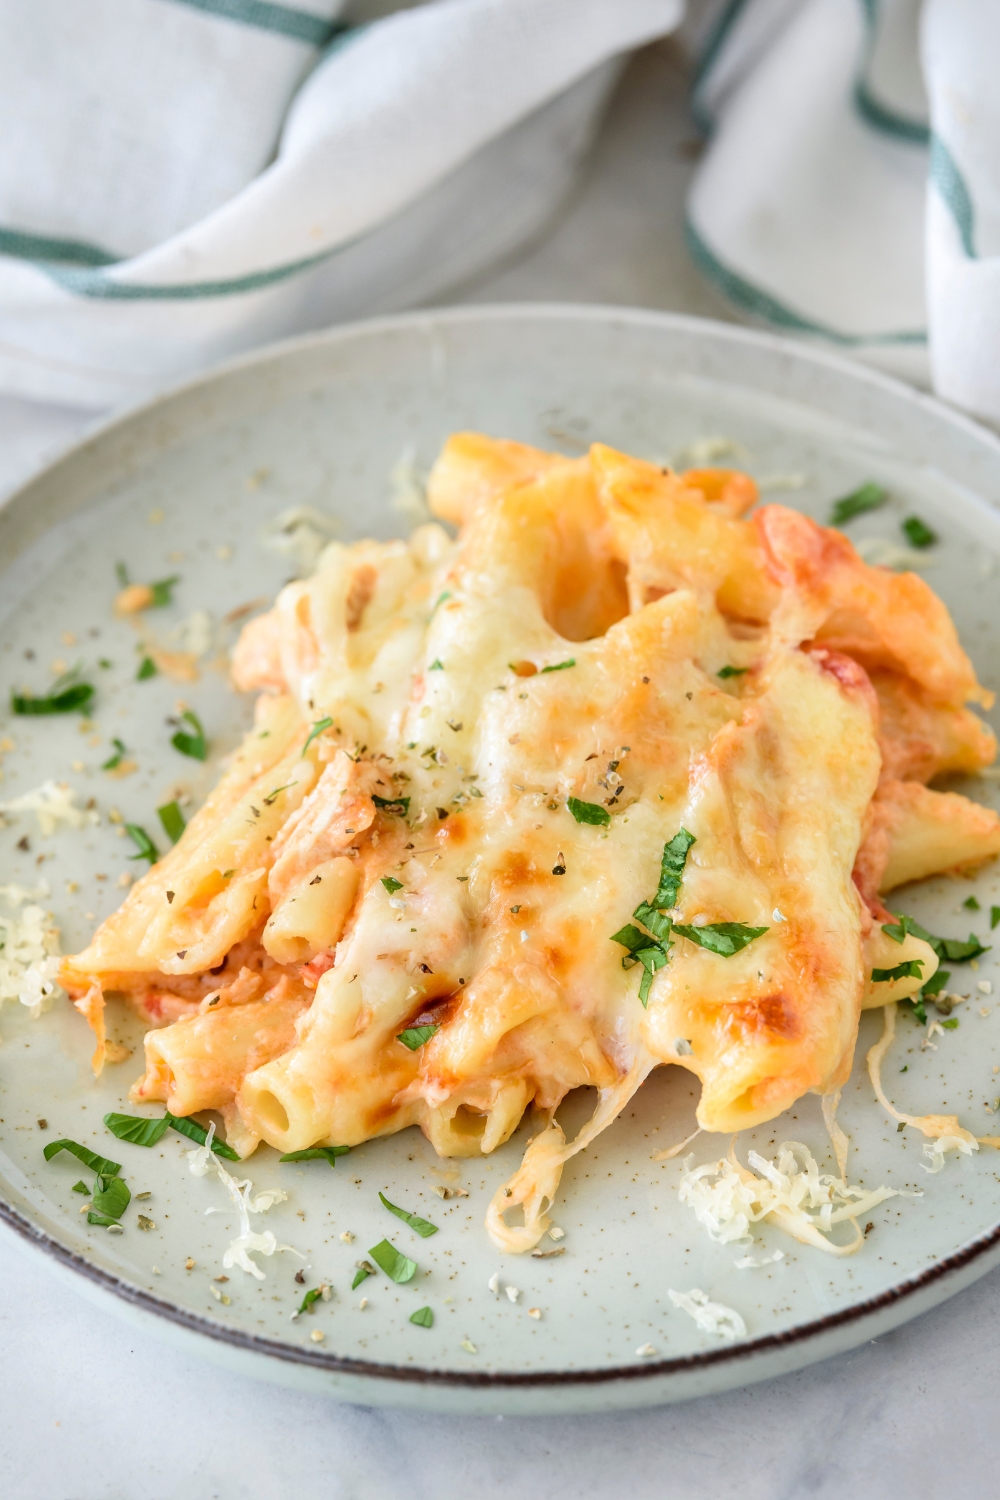 A plate of chicken pasta bake covered in melted cheese and fresh green herbs.